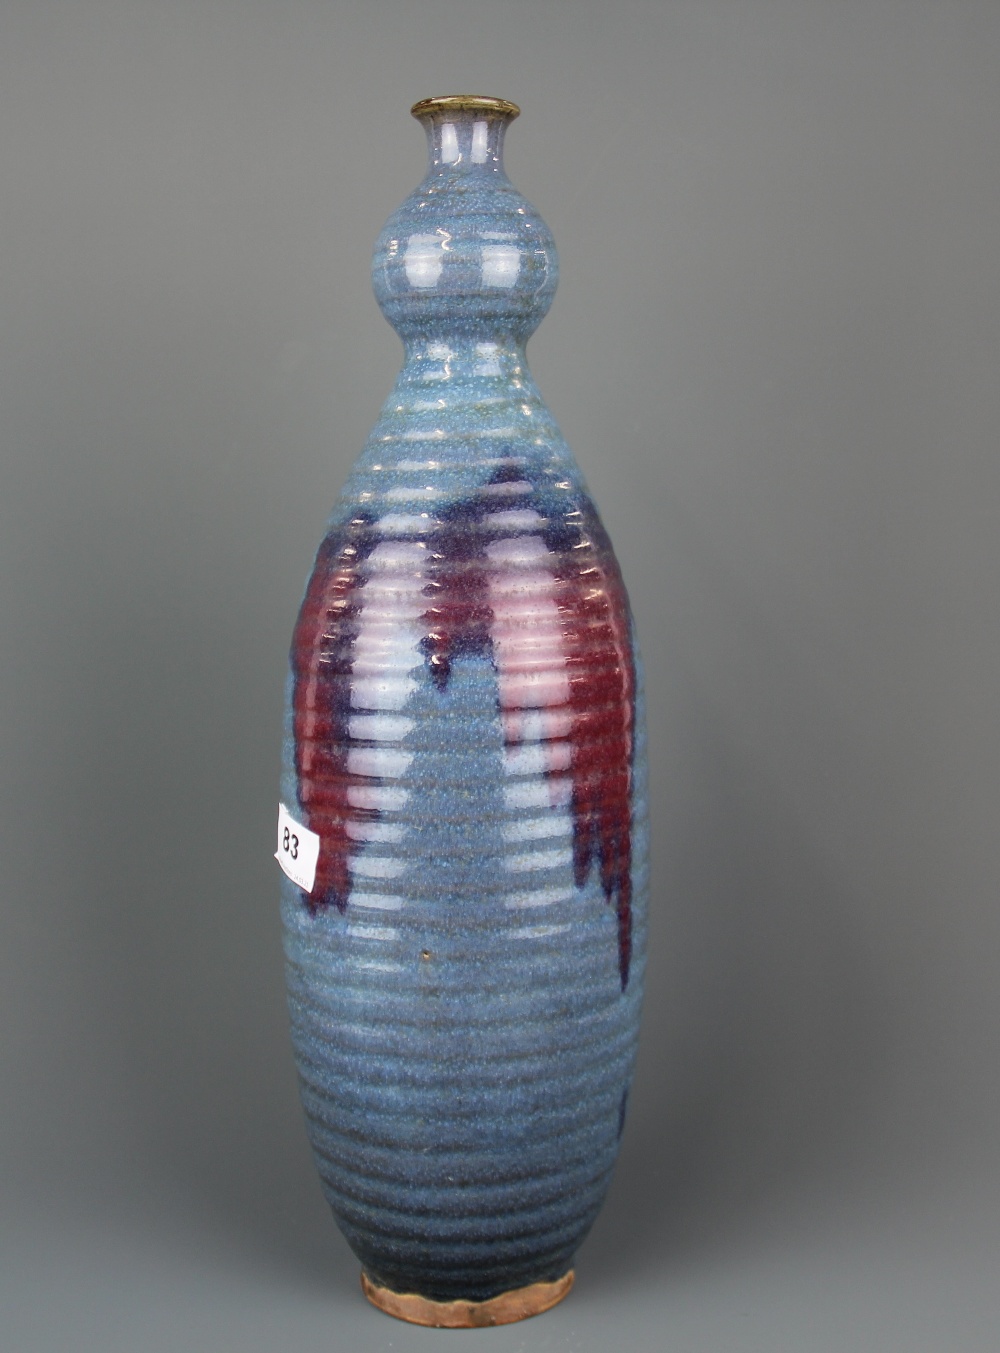 An unusual Chinese Zhun glazed pottery vase with ribbed and splashed decoration, H. 45cm.